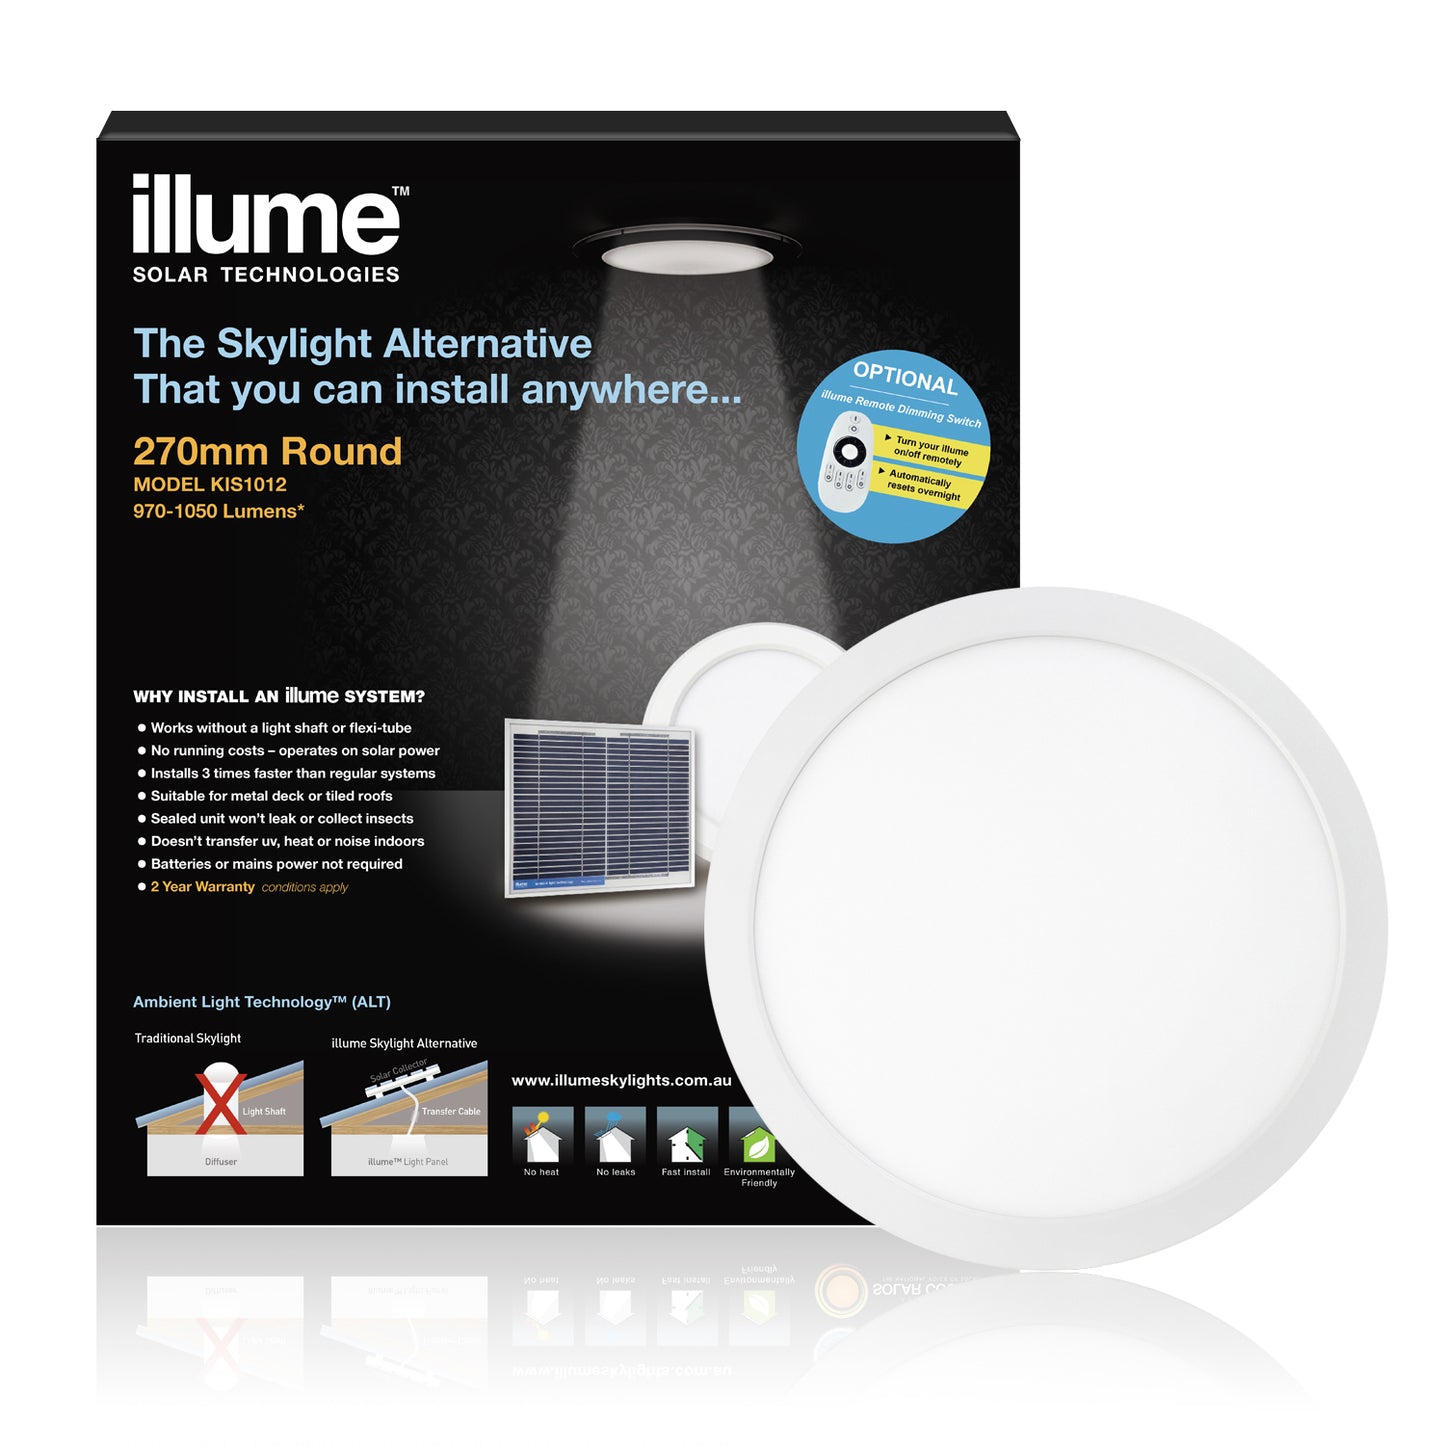 A photo of the product illume that is a skylight alternative.